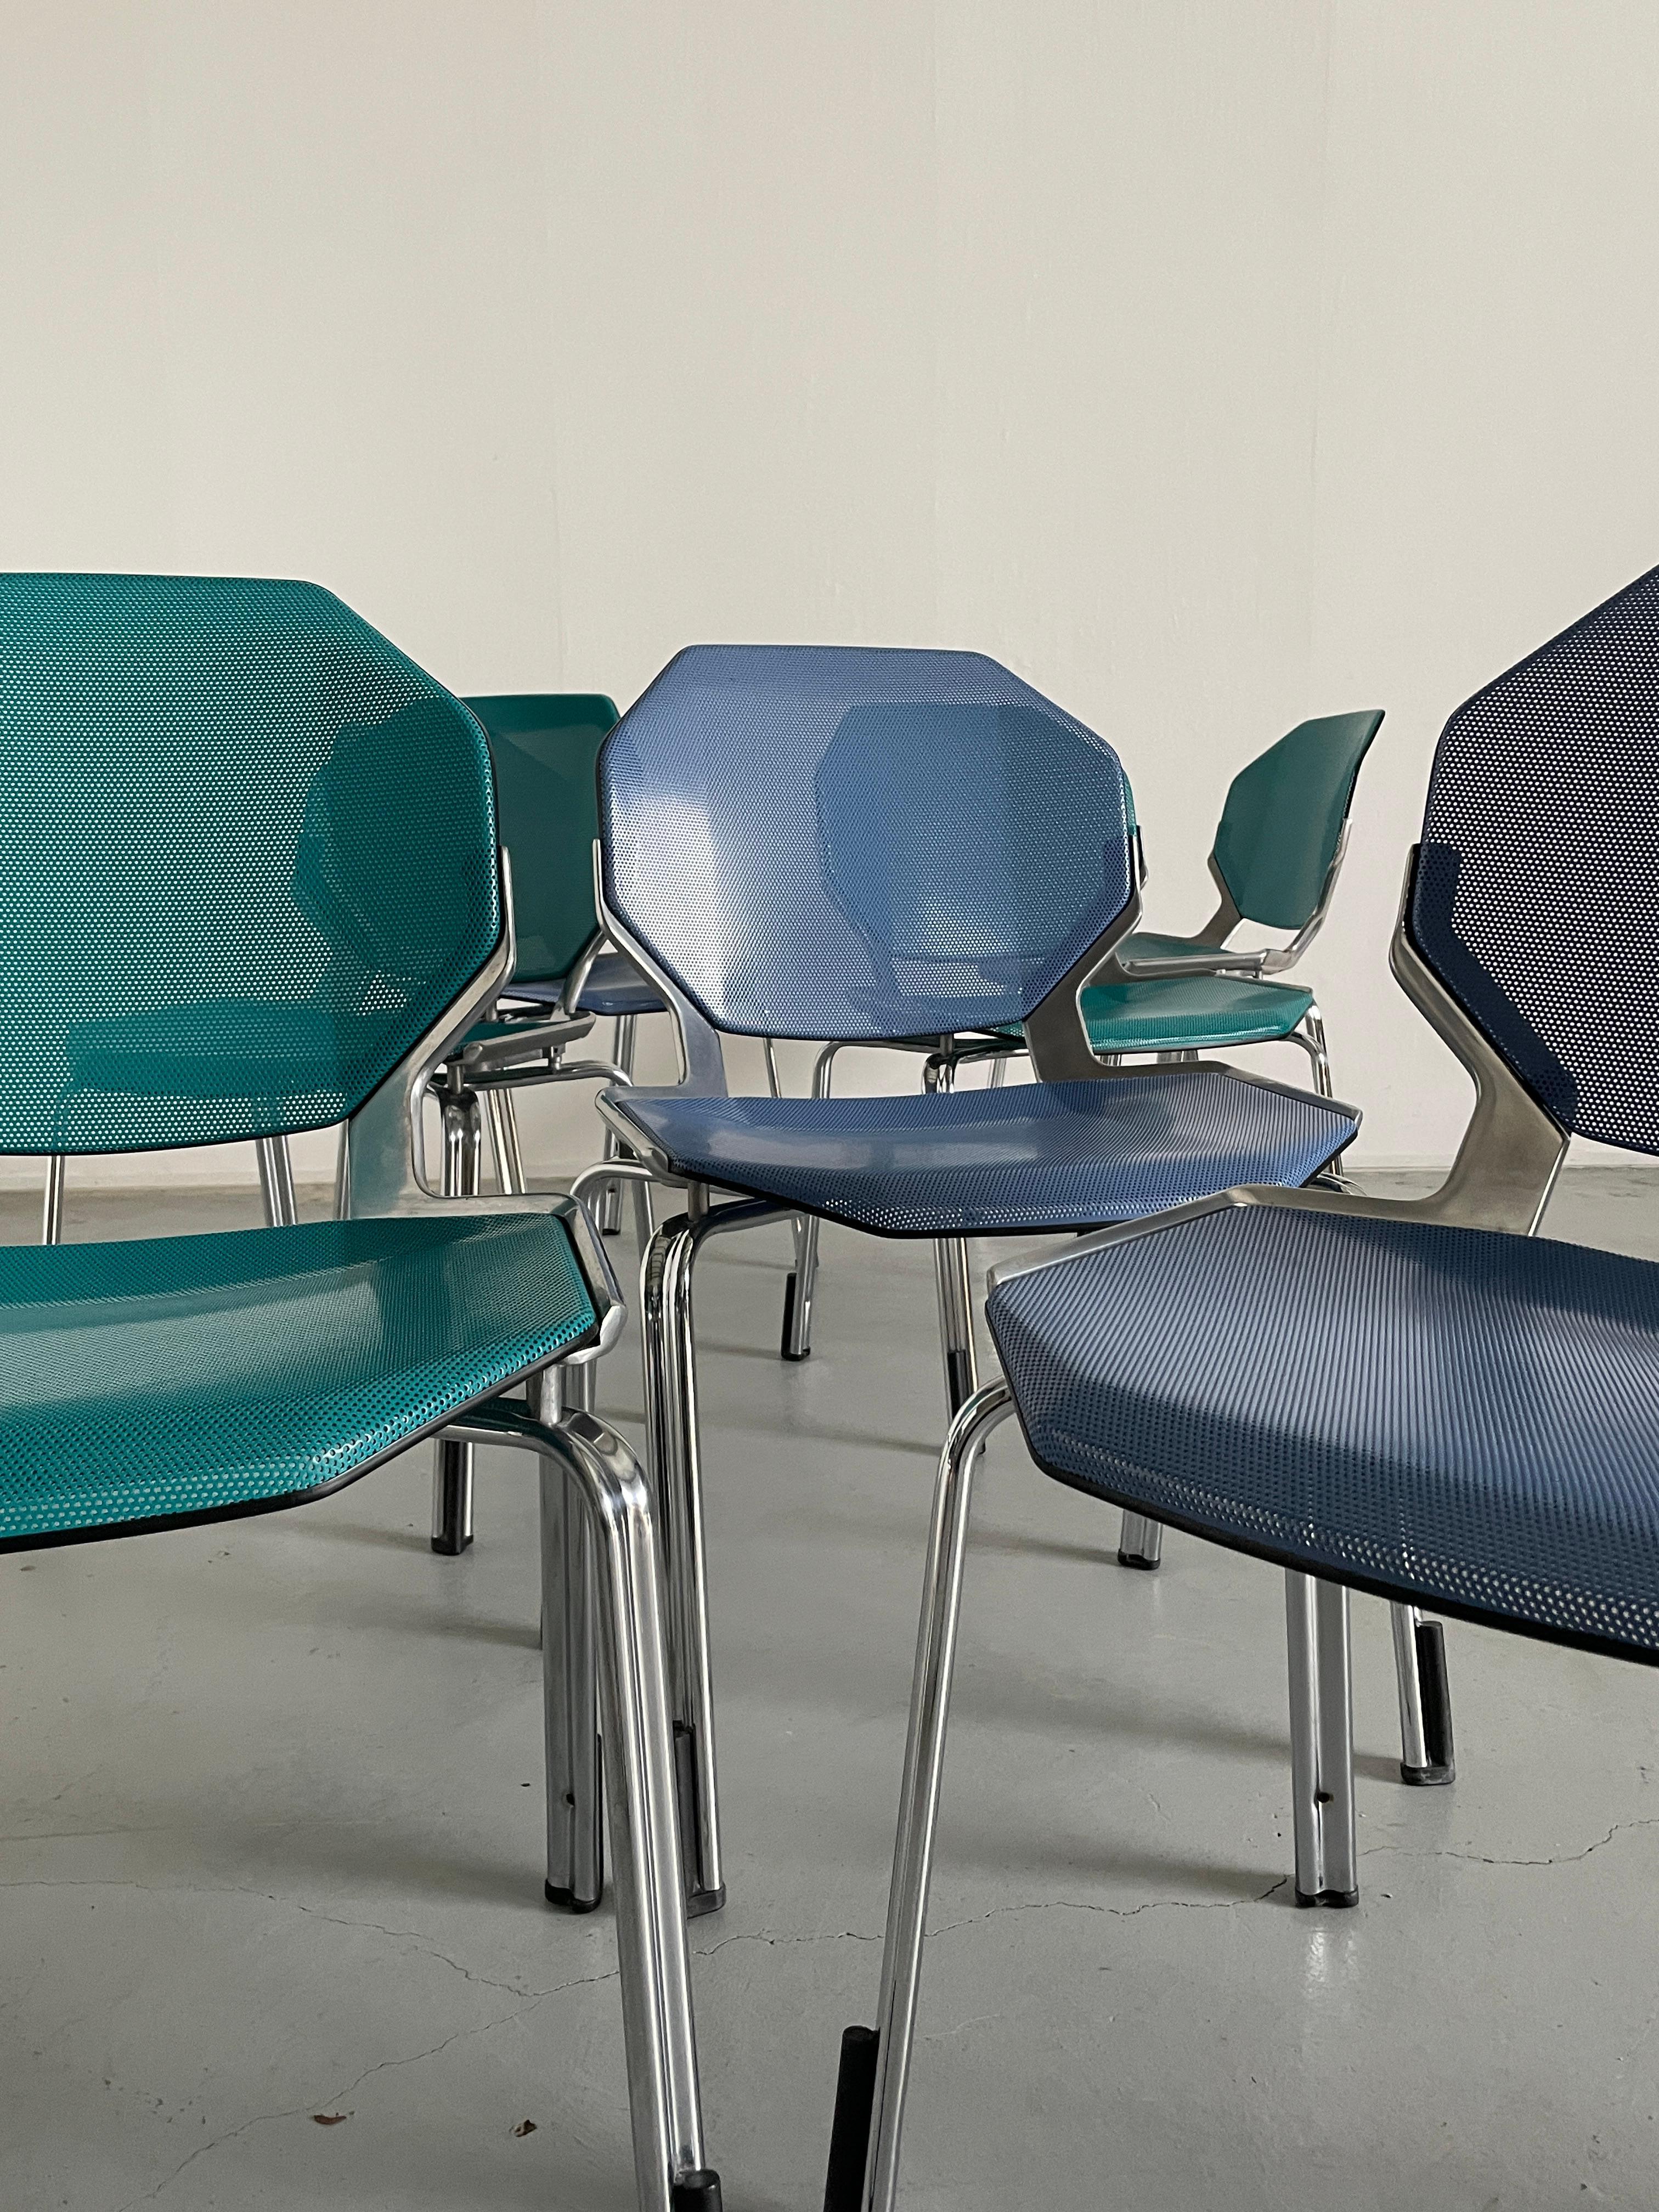 Space Age Futuristic Octagonal Stackable Dining Chairs by Fröscher Sitform, 90s For Sale 12